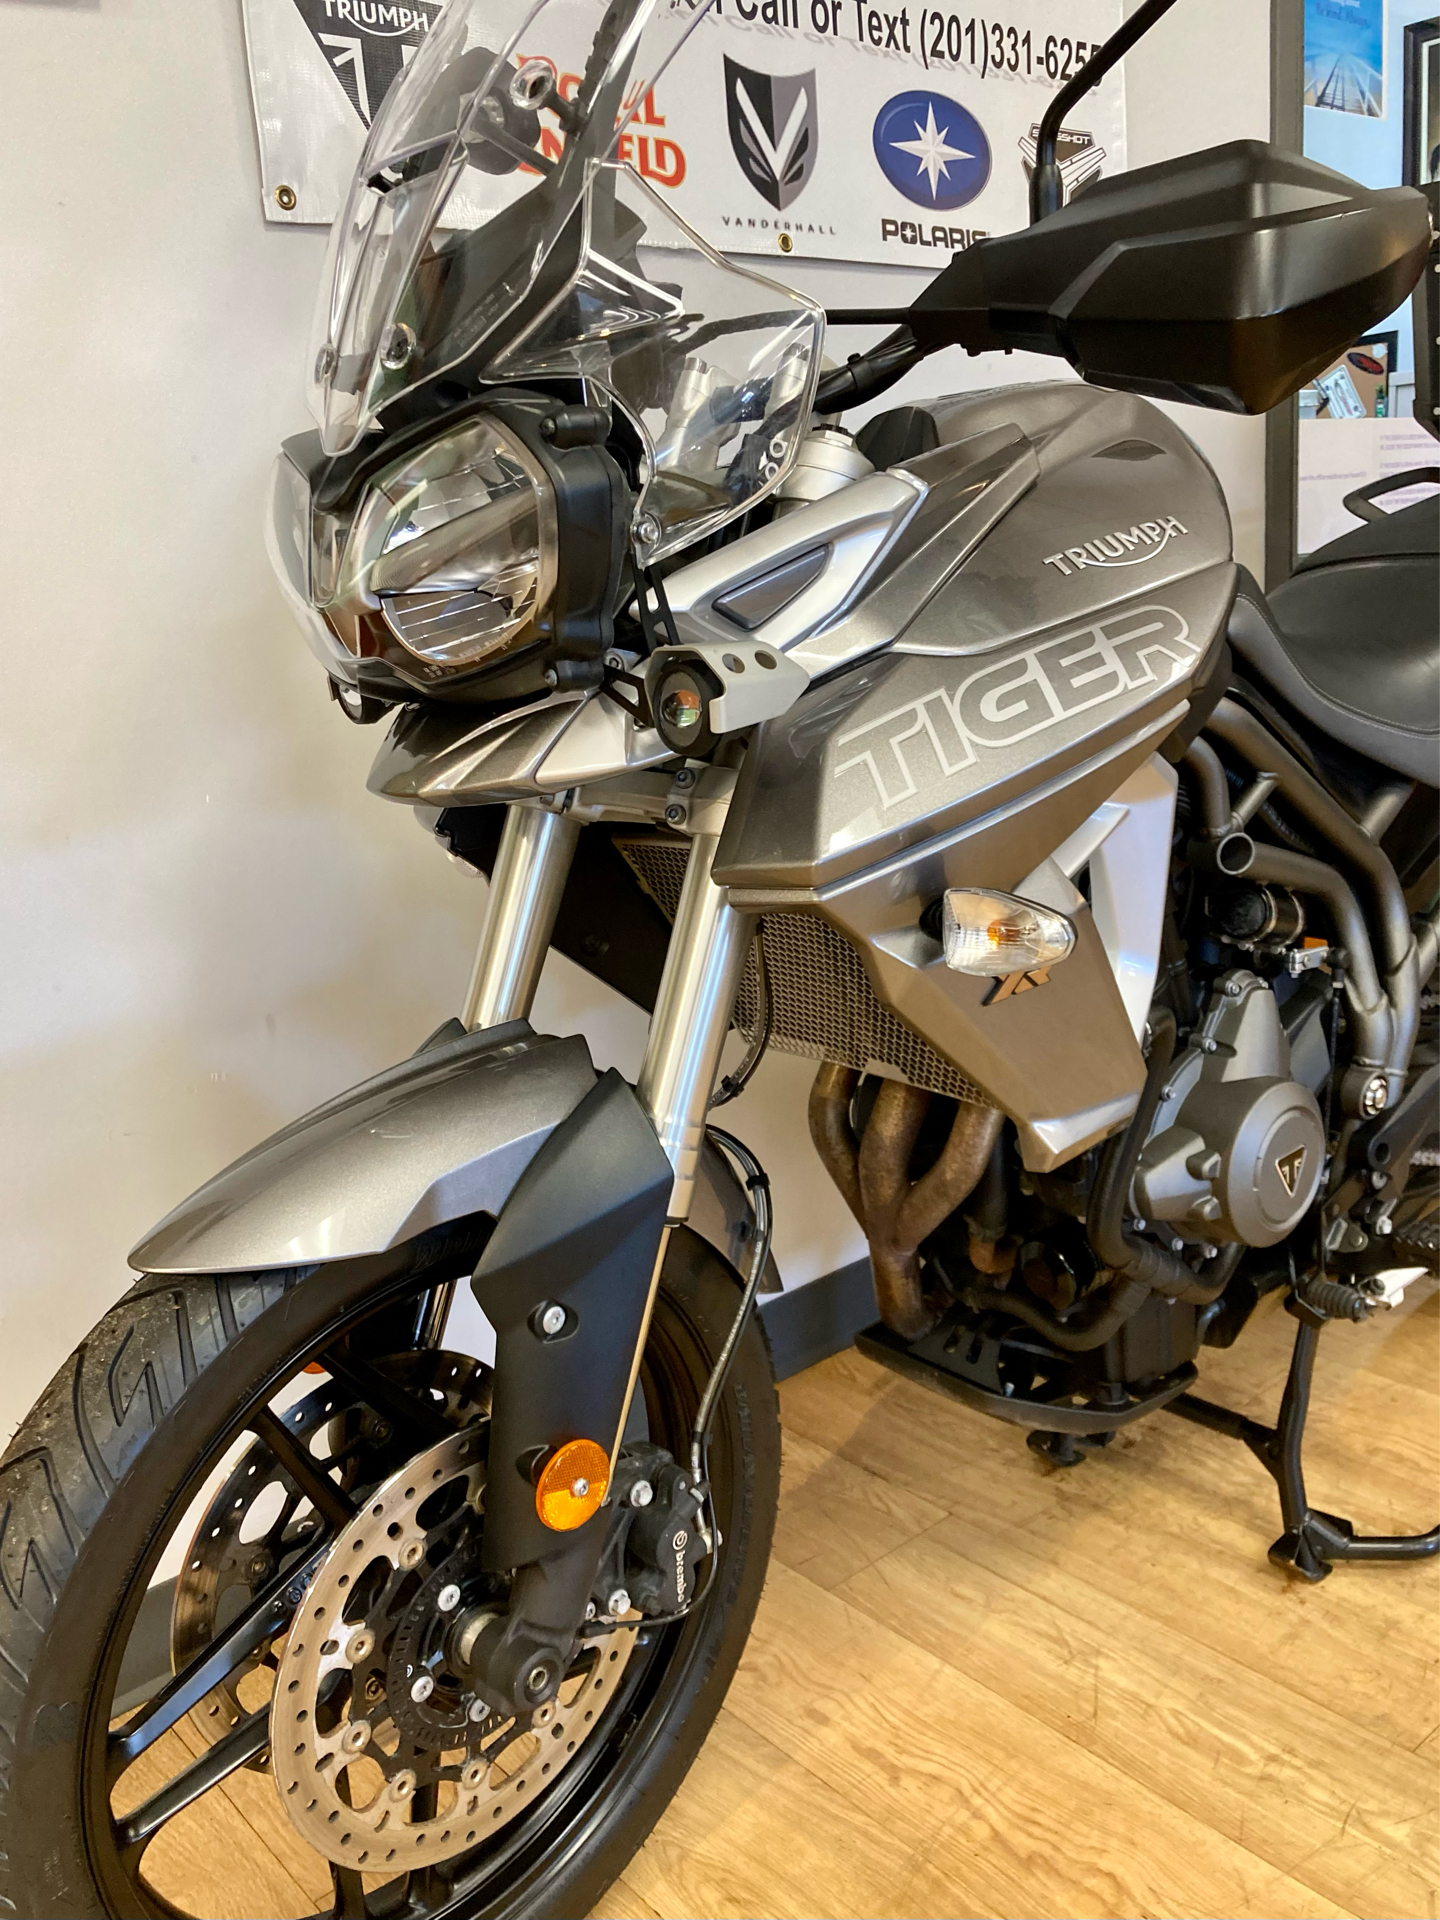 2018 Triumph Tiger 800 XRt in Mahwah, New Jersey - Photo 3